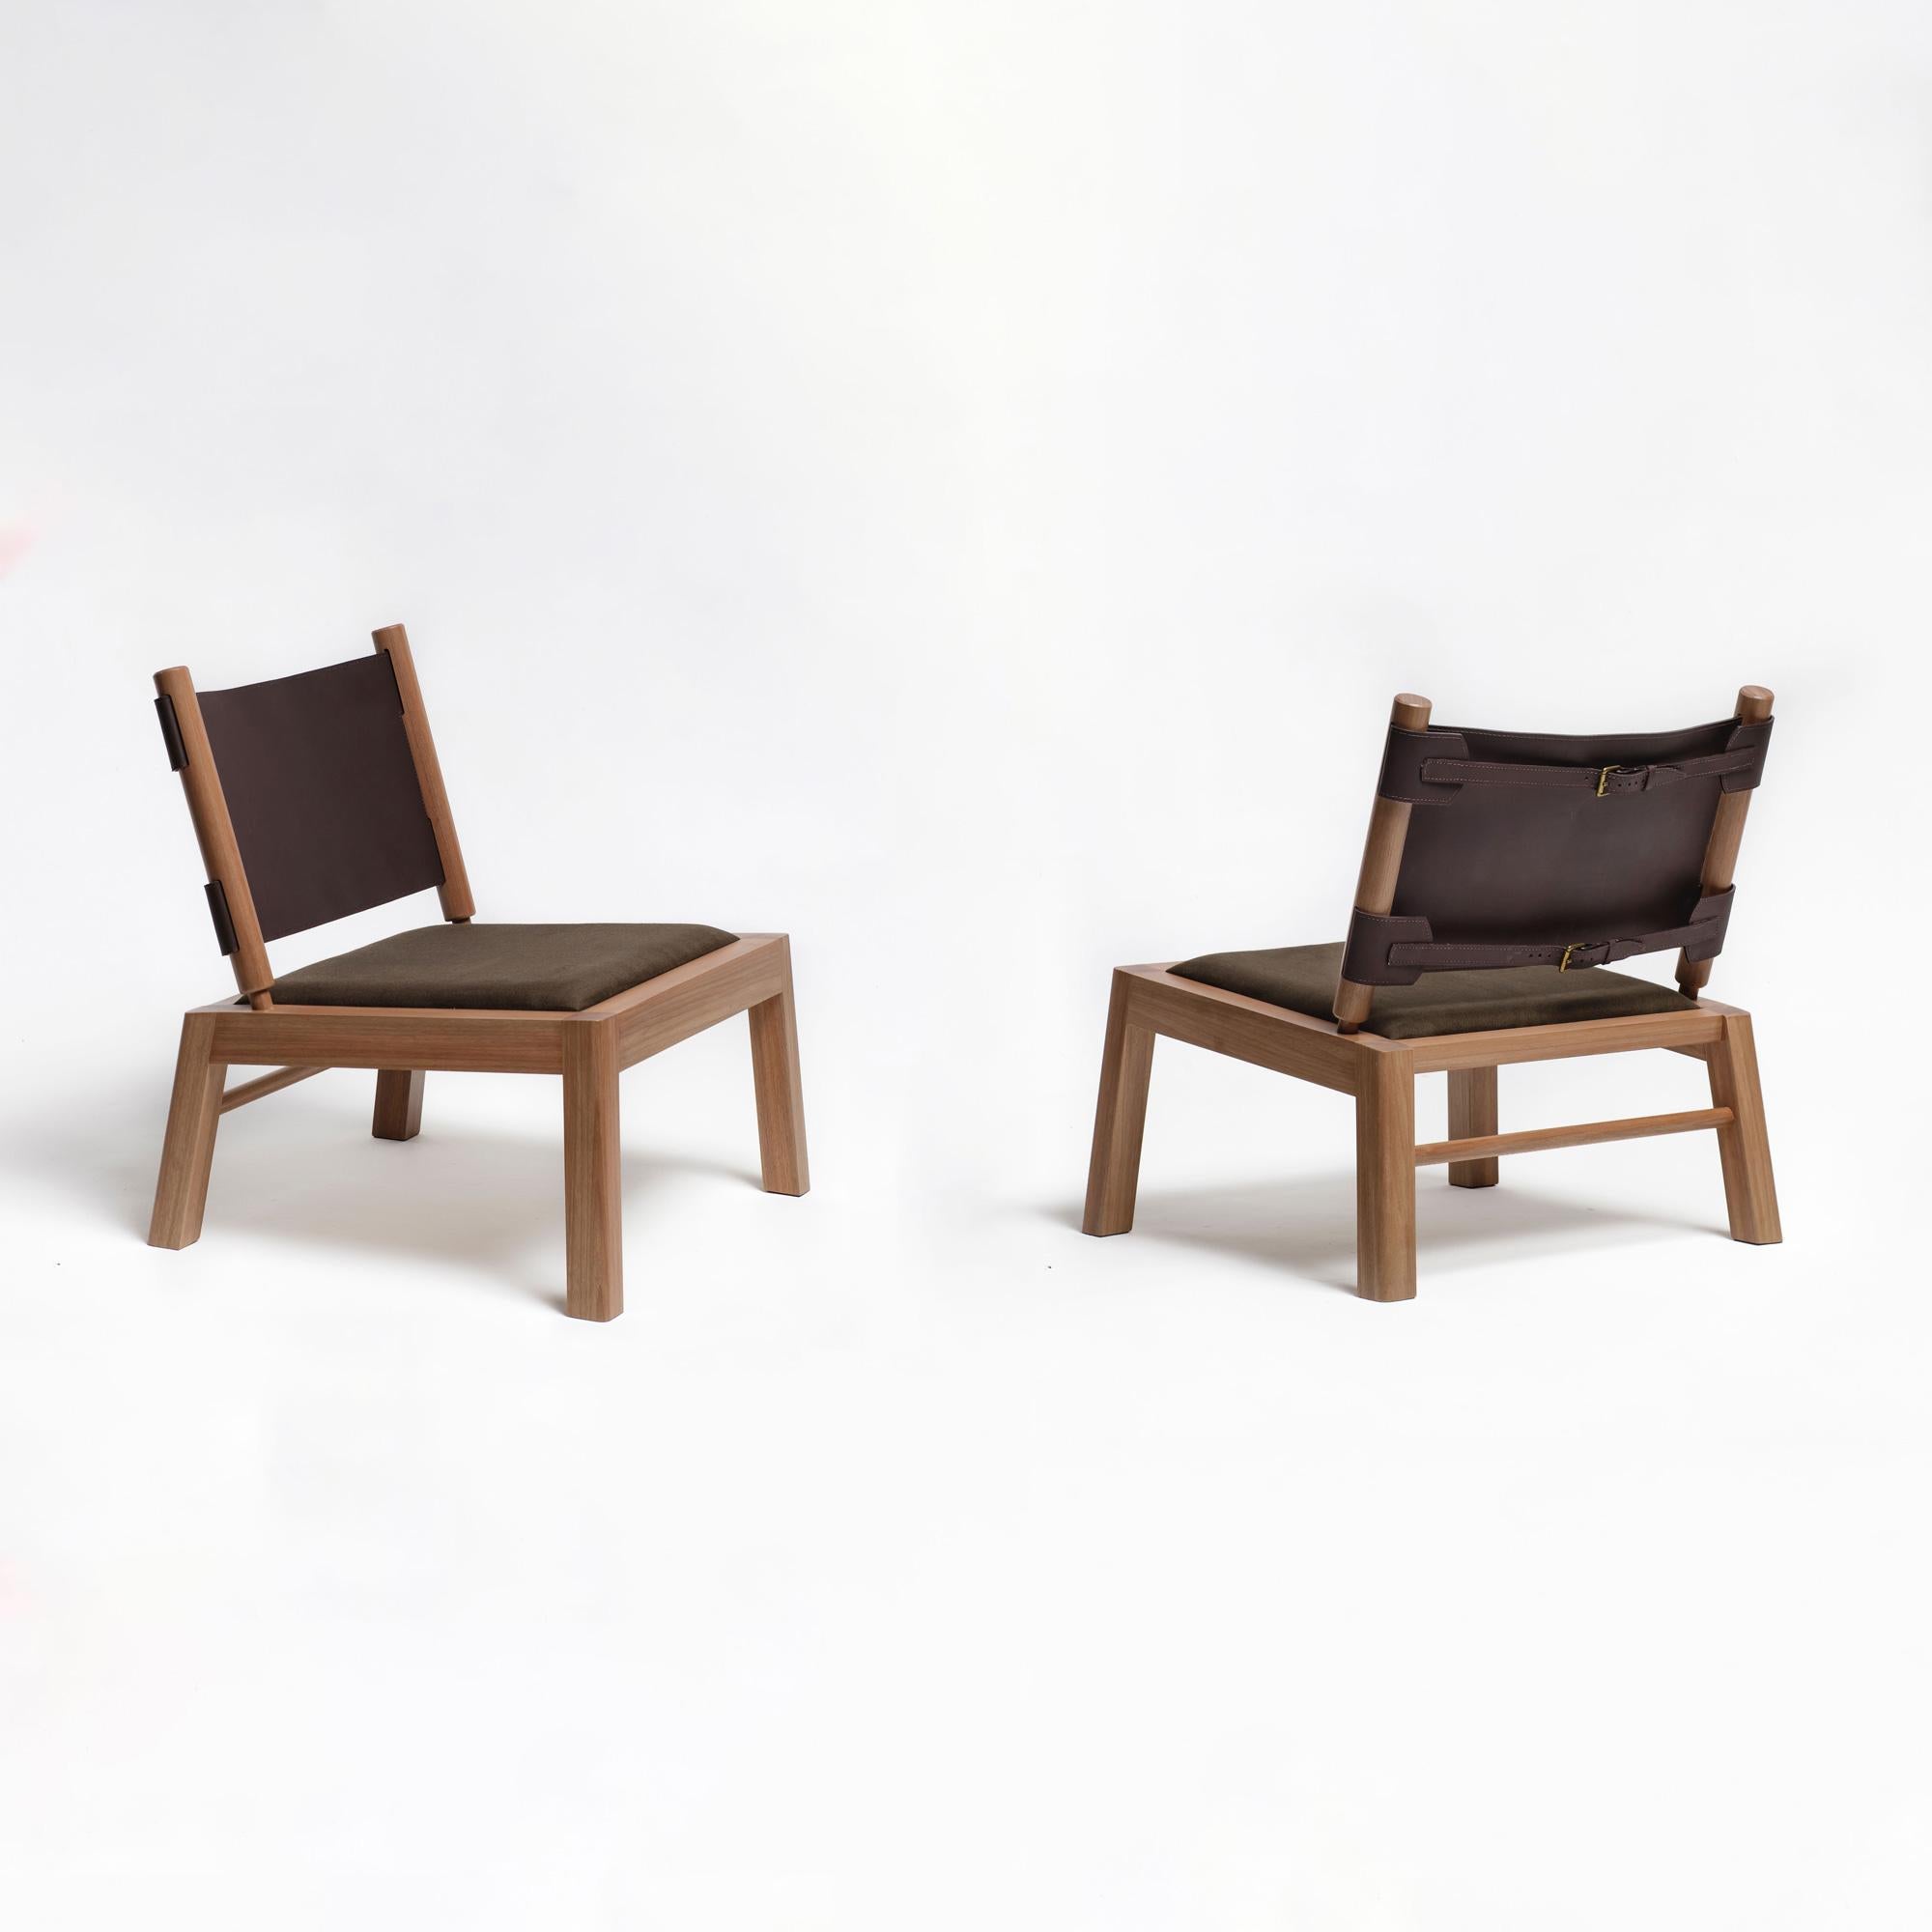 Set of 2 Oulipo Lounge Chairs. Oulipo is a contemporary lounge chair handcrafted in certified brazilian hardwood 